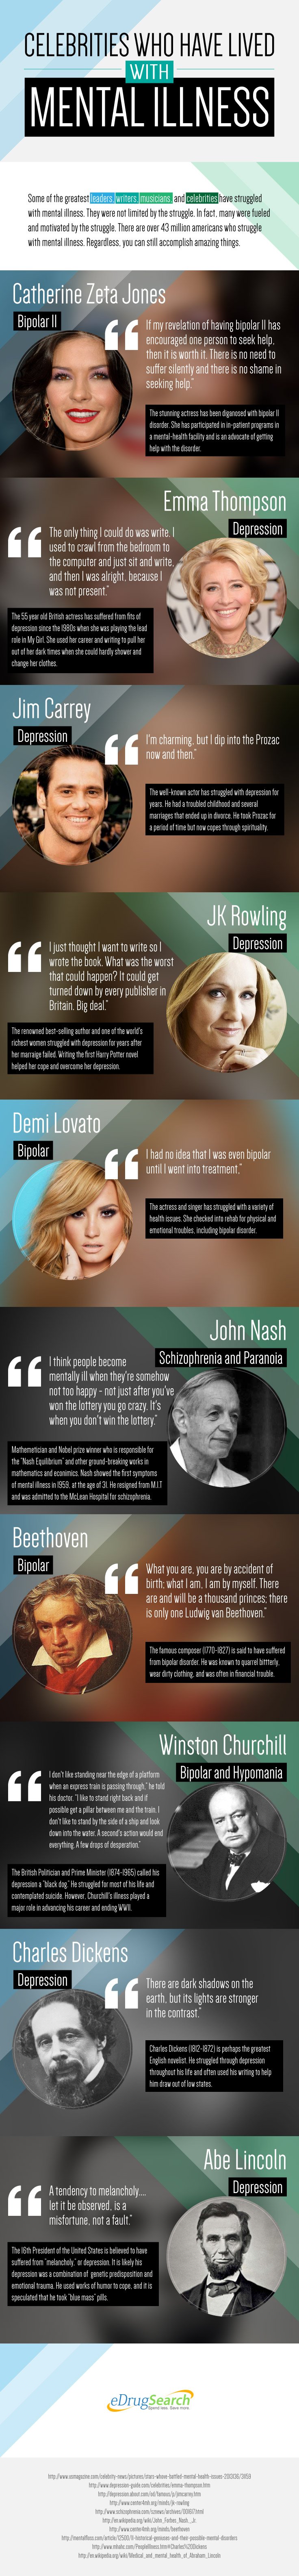 Celebrities Who Have Lived With Mental Illness